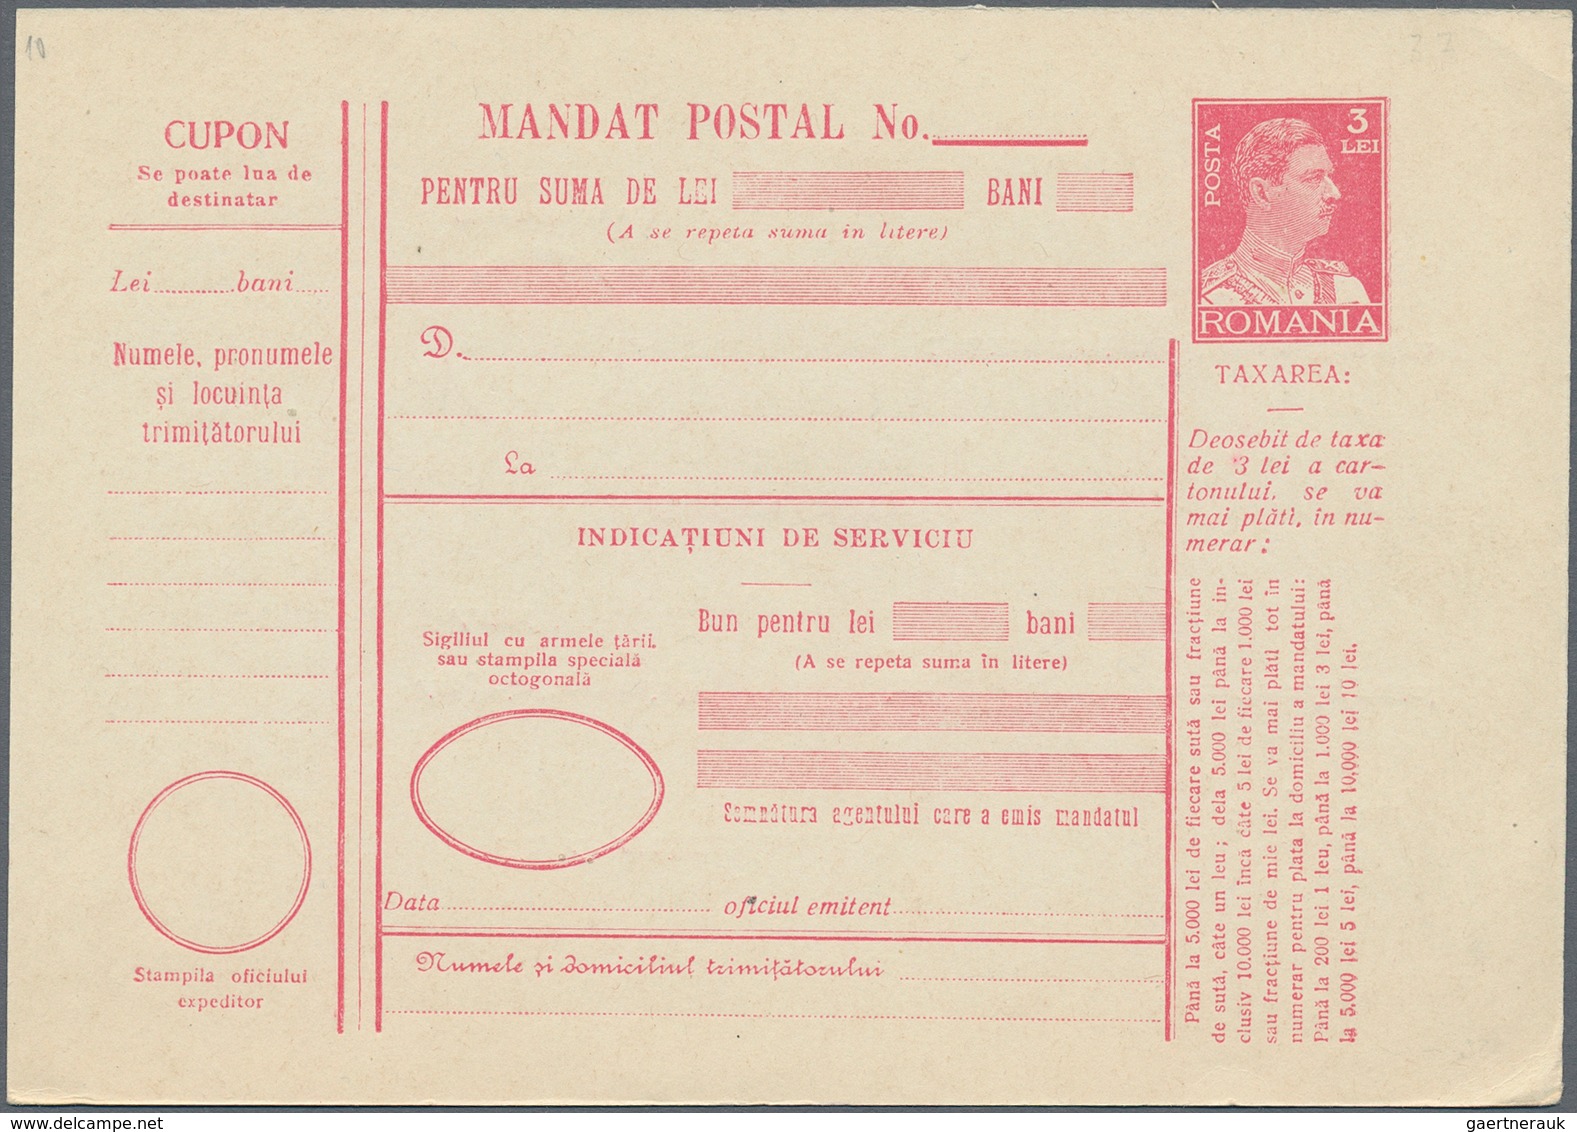 Rumänien - Ganzsachen: 1873/1950 (ca.), holding of about 220 unused and used postal stationery, stat